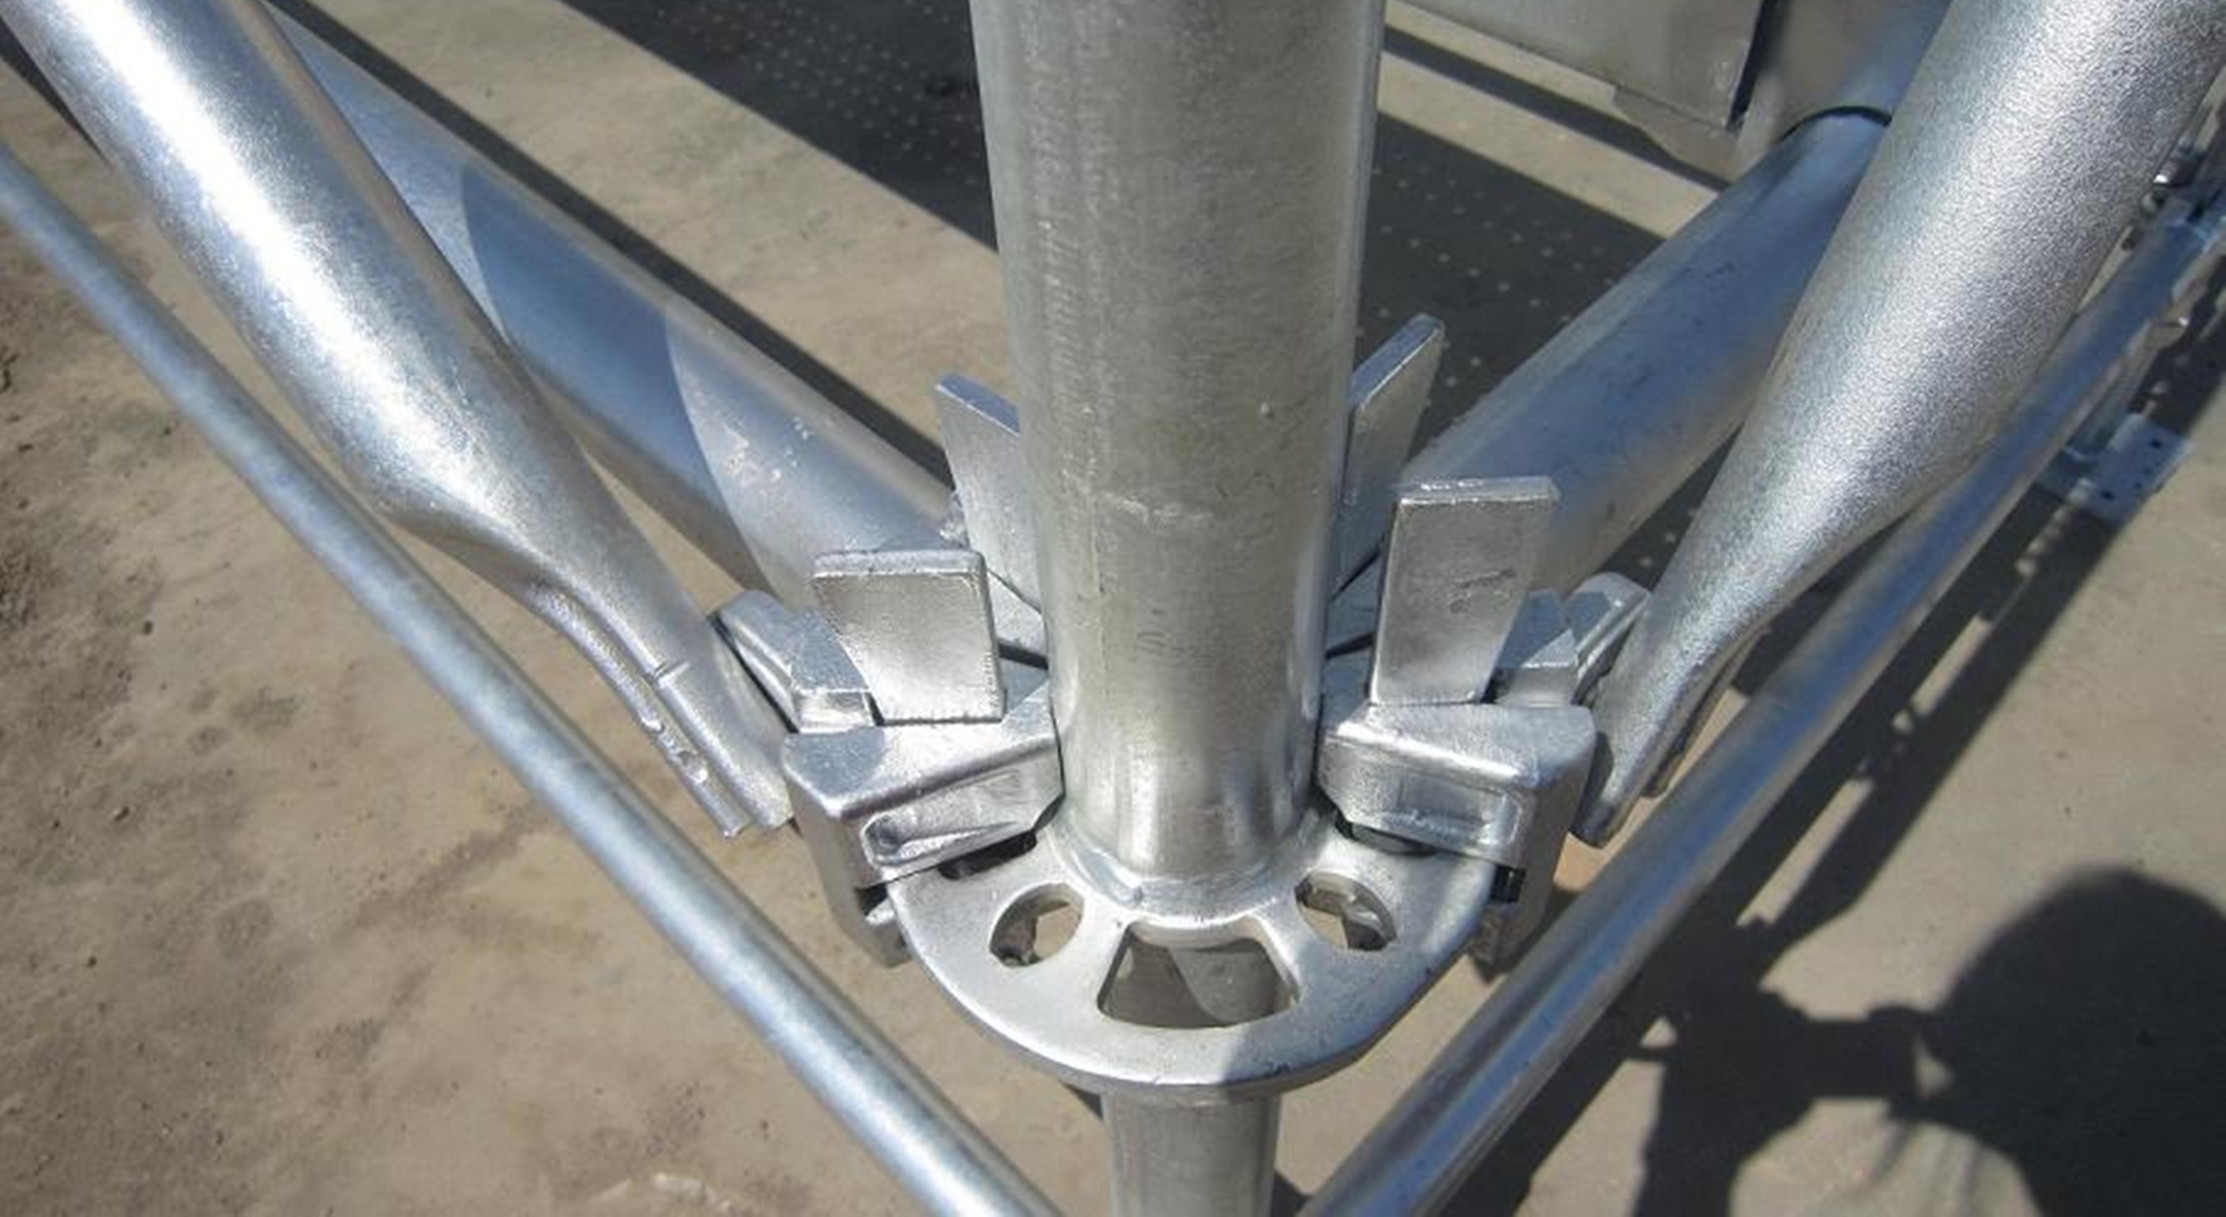 5 Reasons to use a ringlock system scaffold